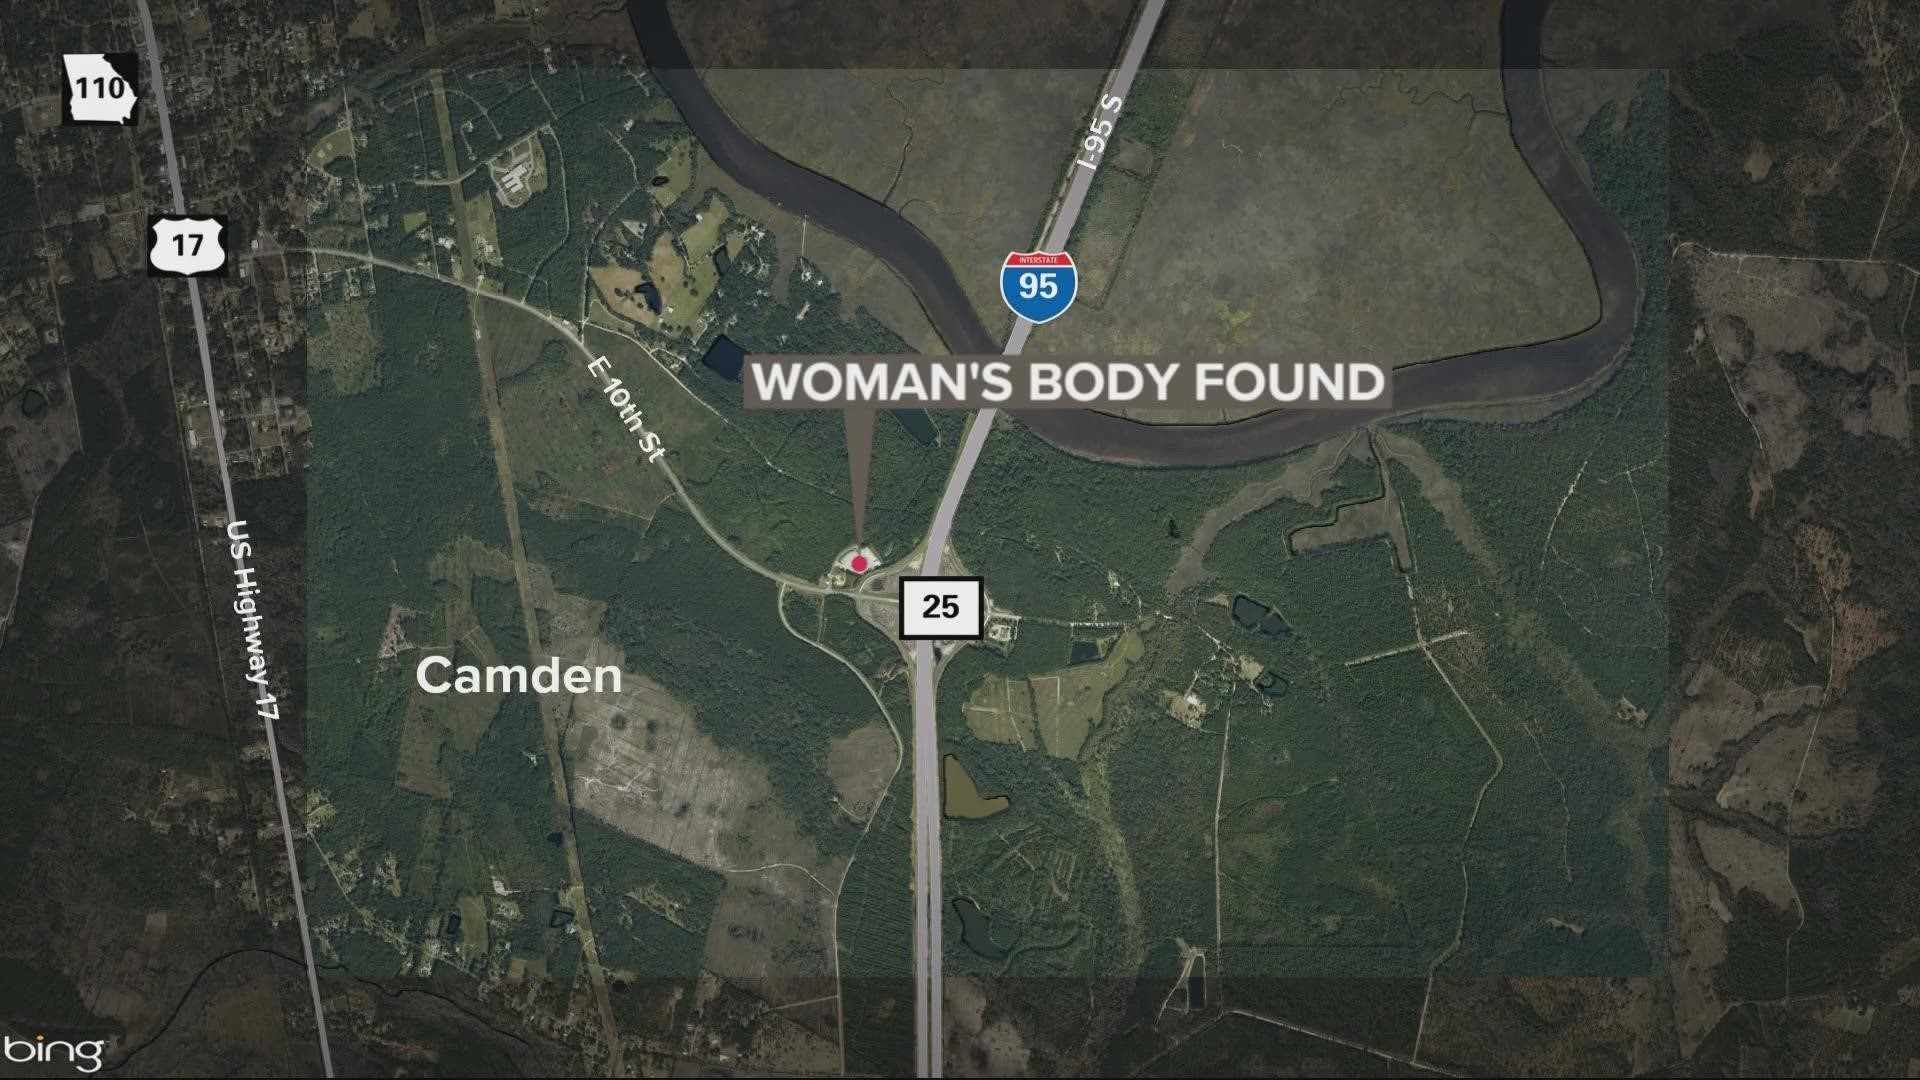 A woman was found dead near the road in Camden County, officials say.